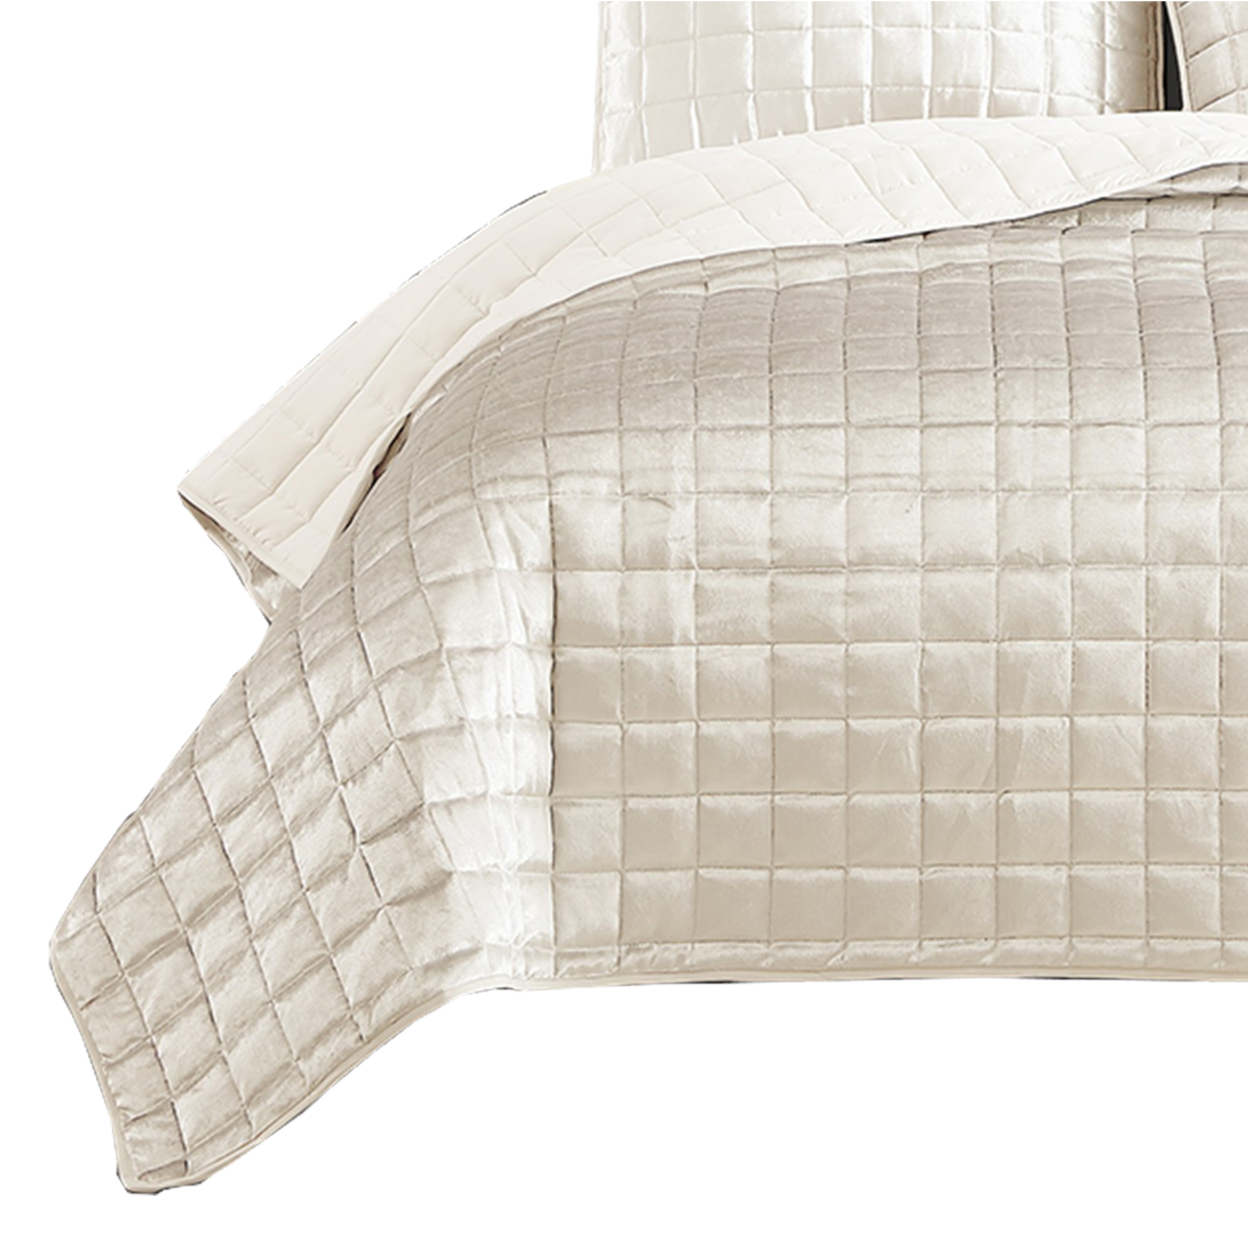 3 Piece Queen Size Coverlet Set With Stitched Square Pattern, Cream- Saltoro Sherpi